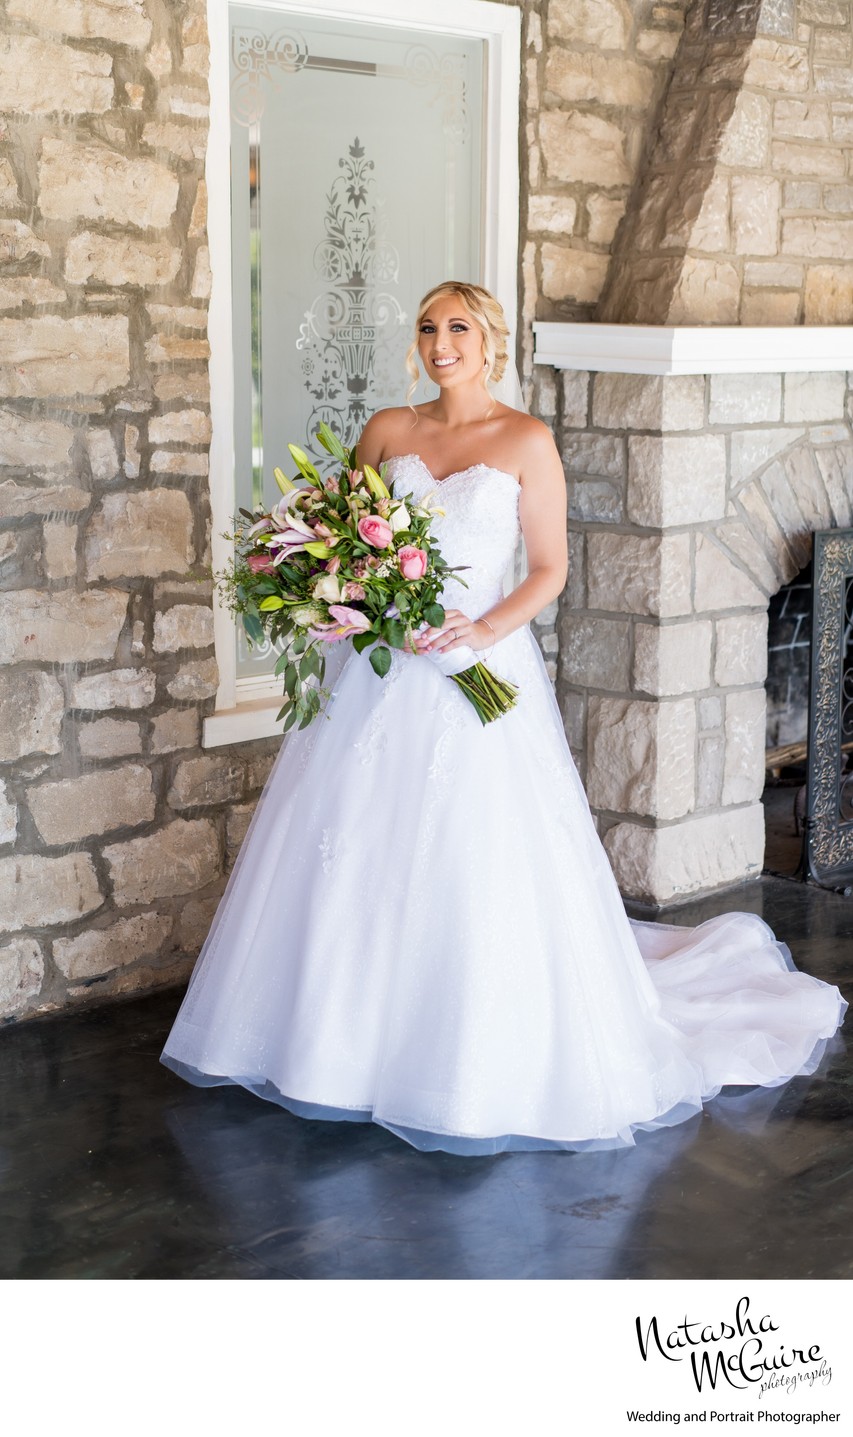 Full length photo of bride at bridal suite